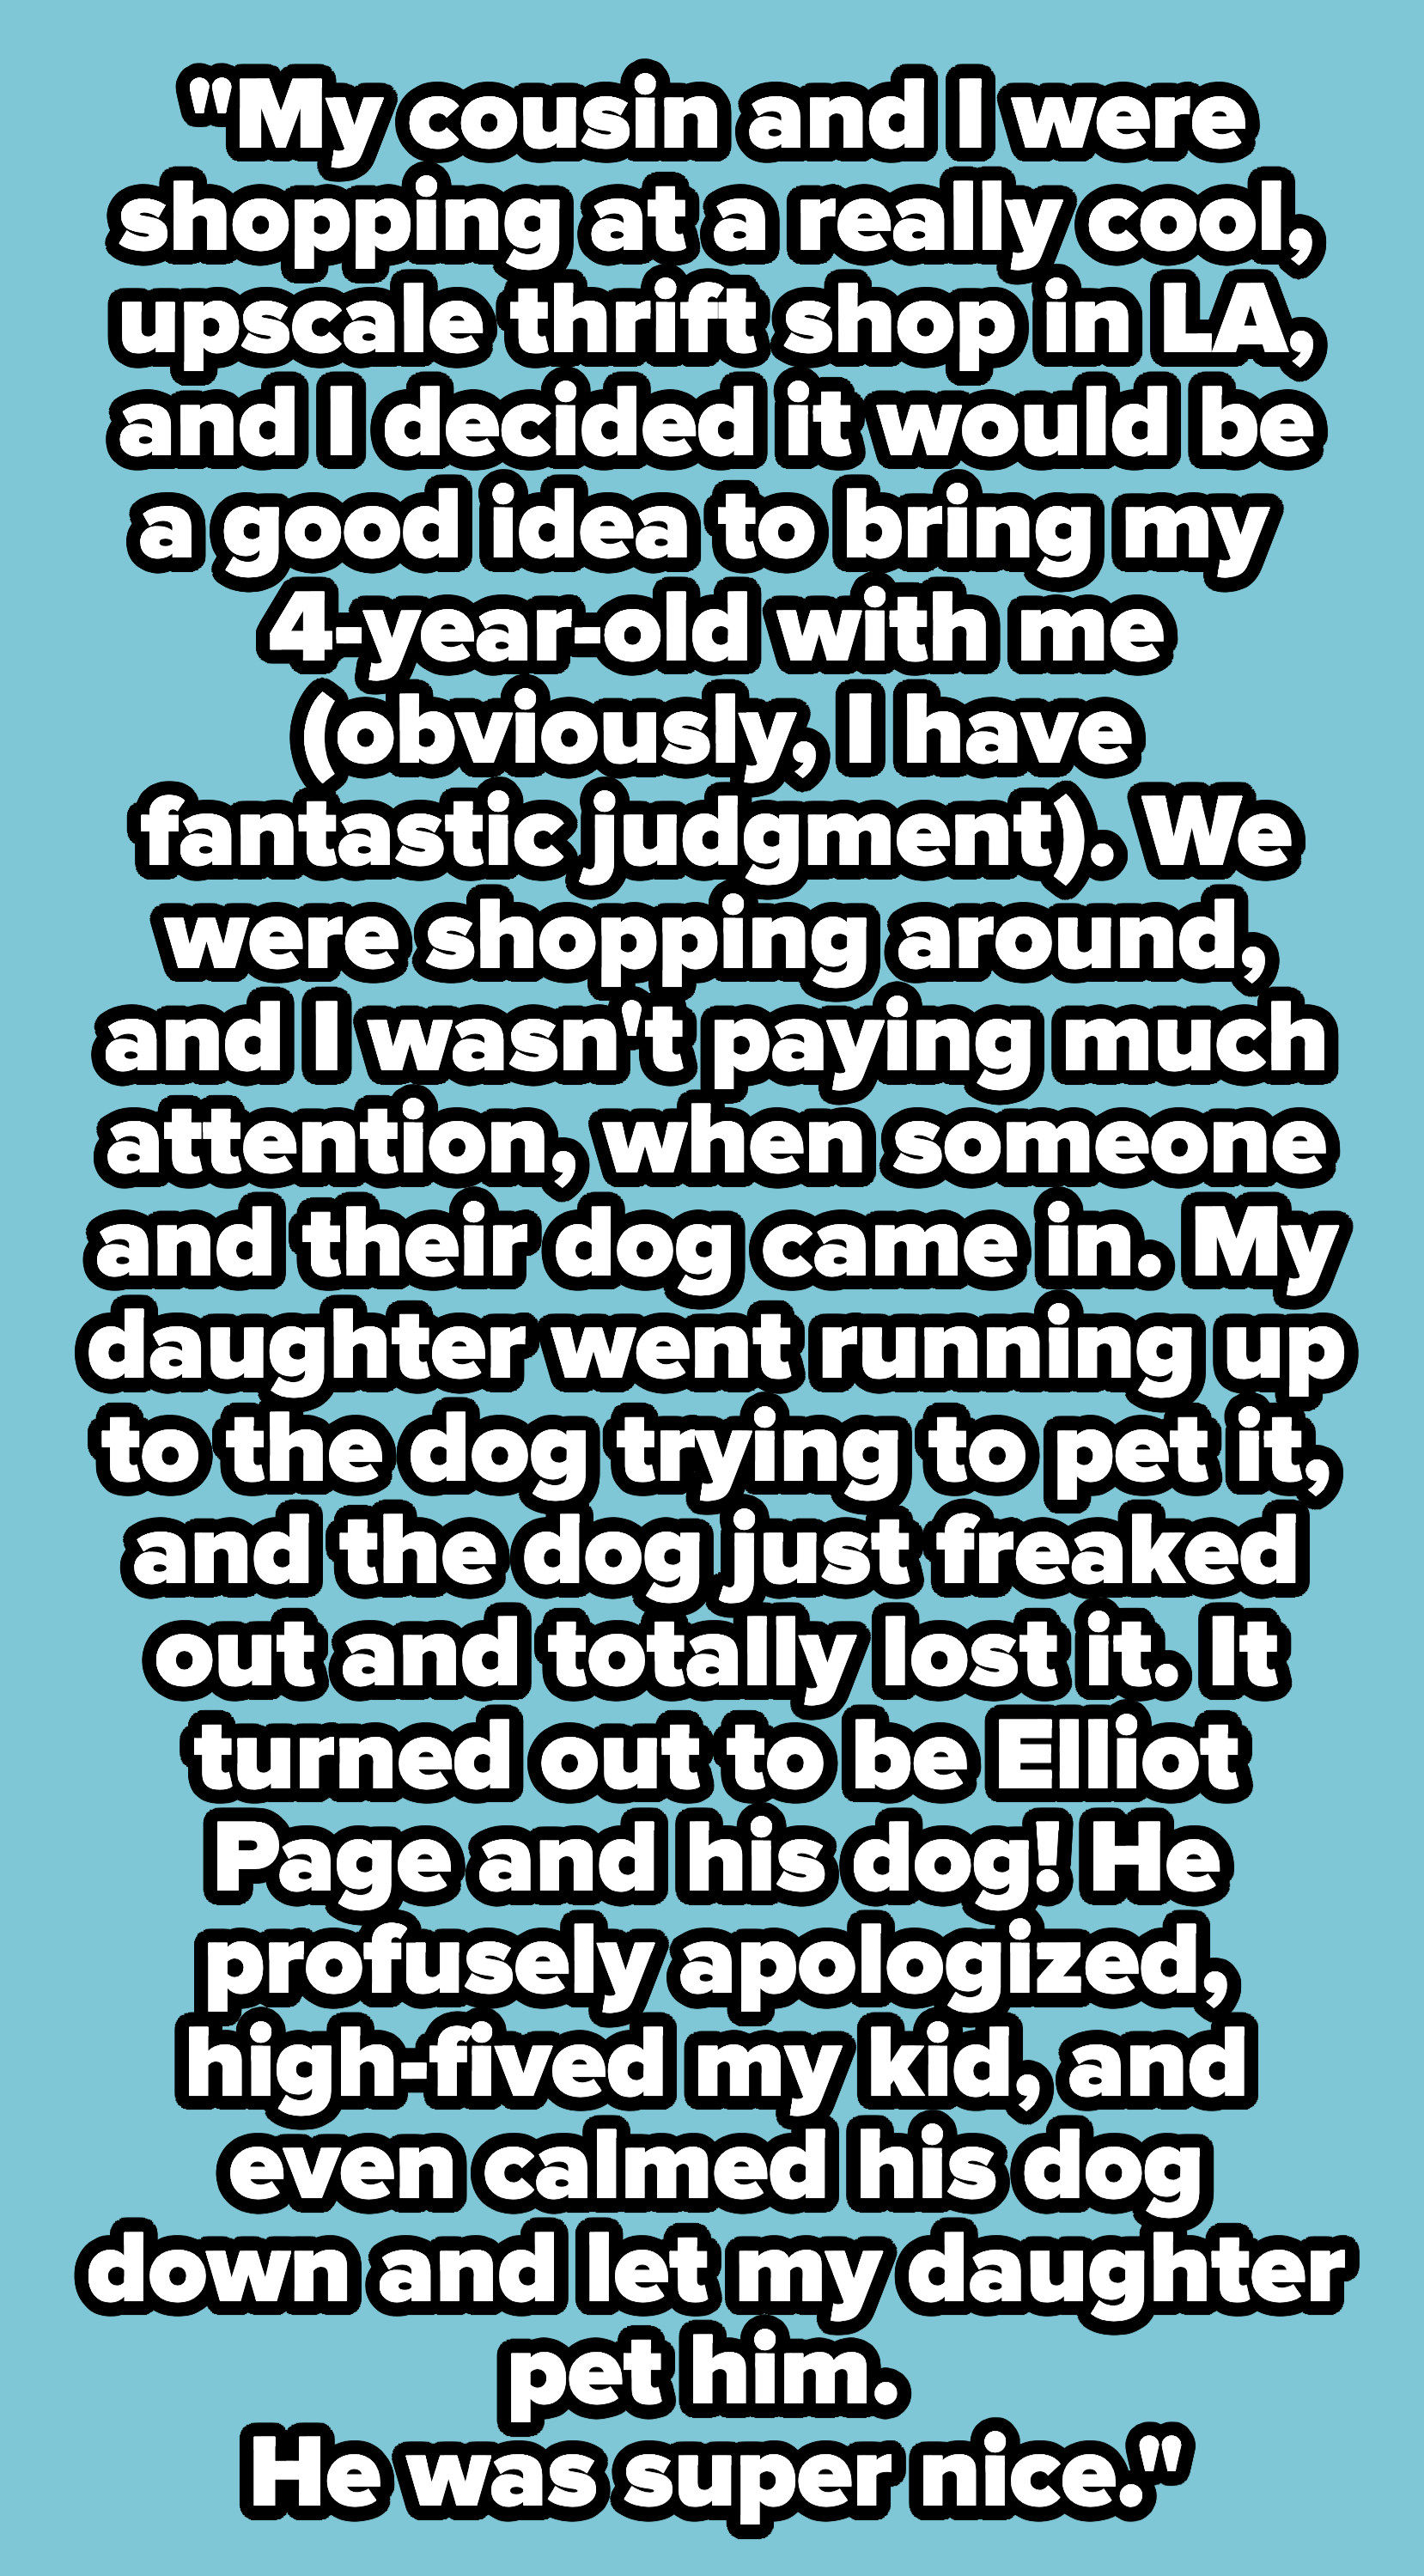 Page apologizing to his fan about his dog freaking out, and high-fiving the fan and letting them pet his dog